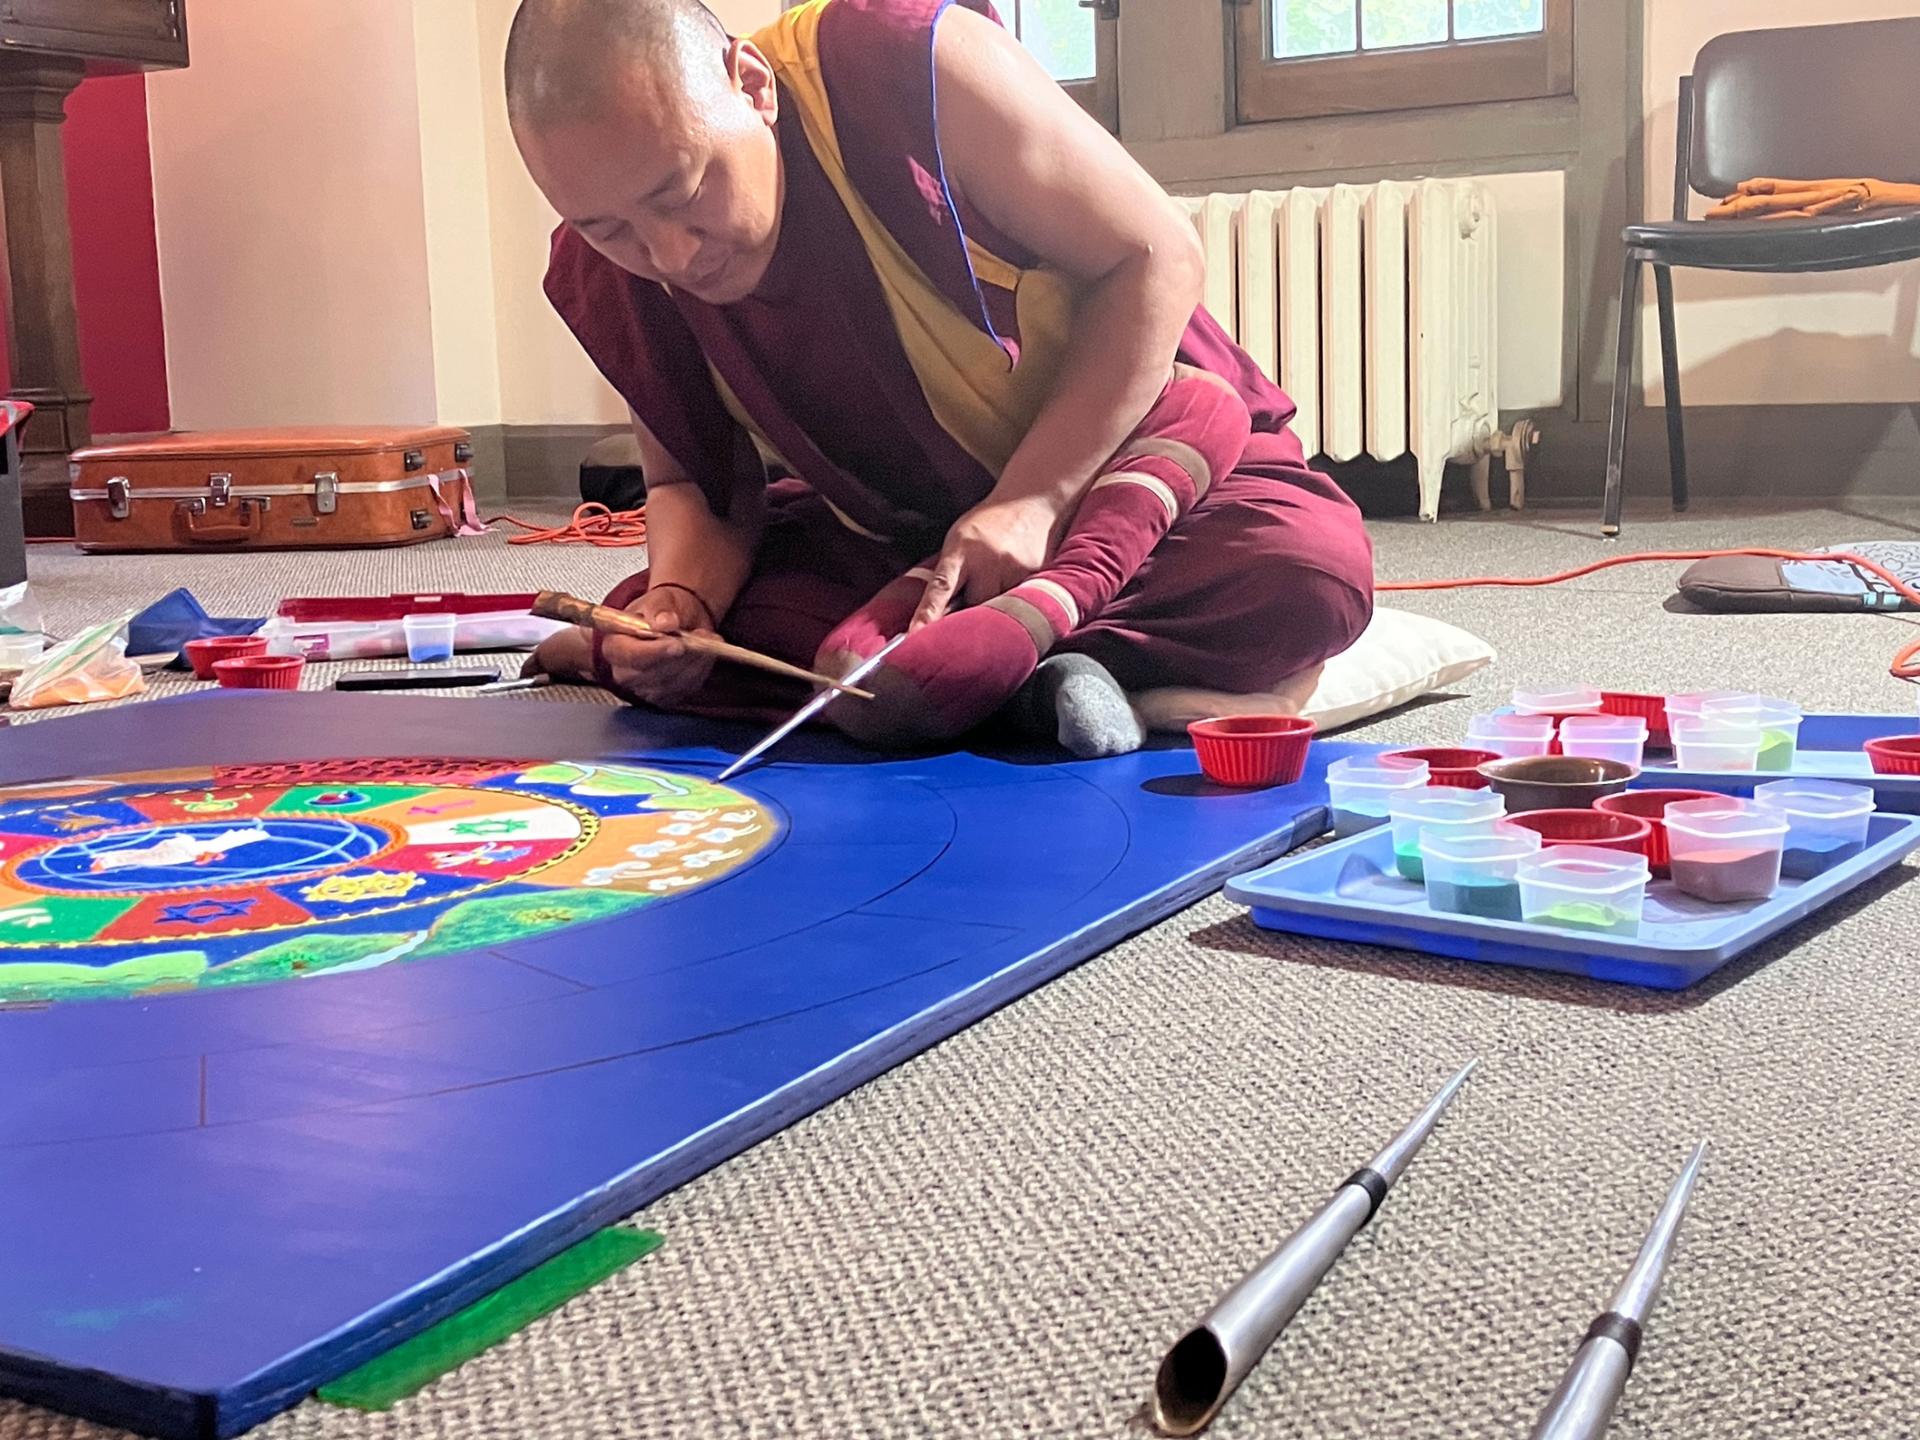 The monks work solo and in groups to complete various aspects of the intricate design for world peace.